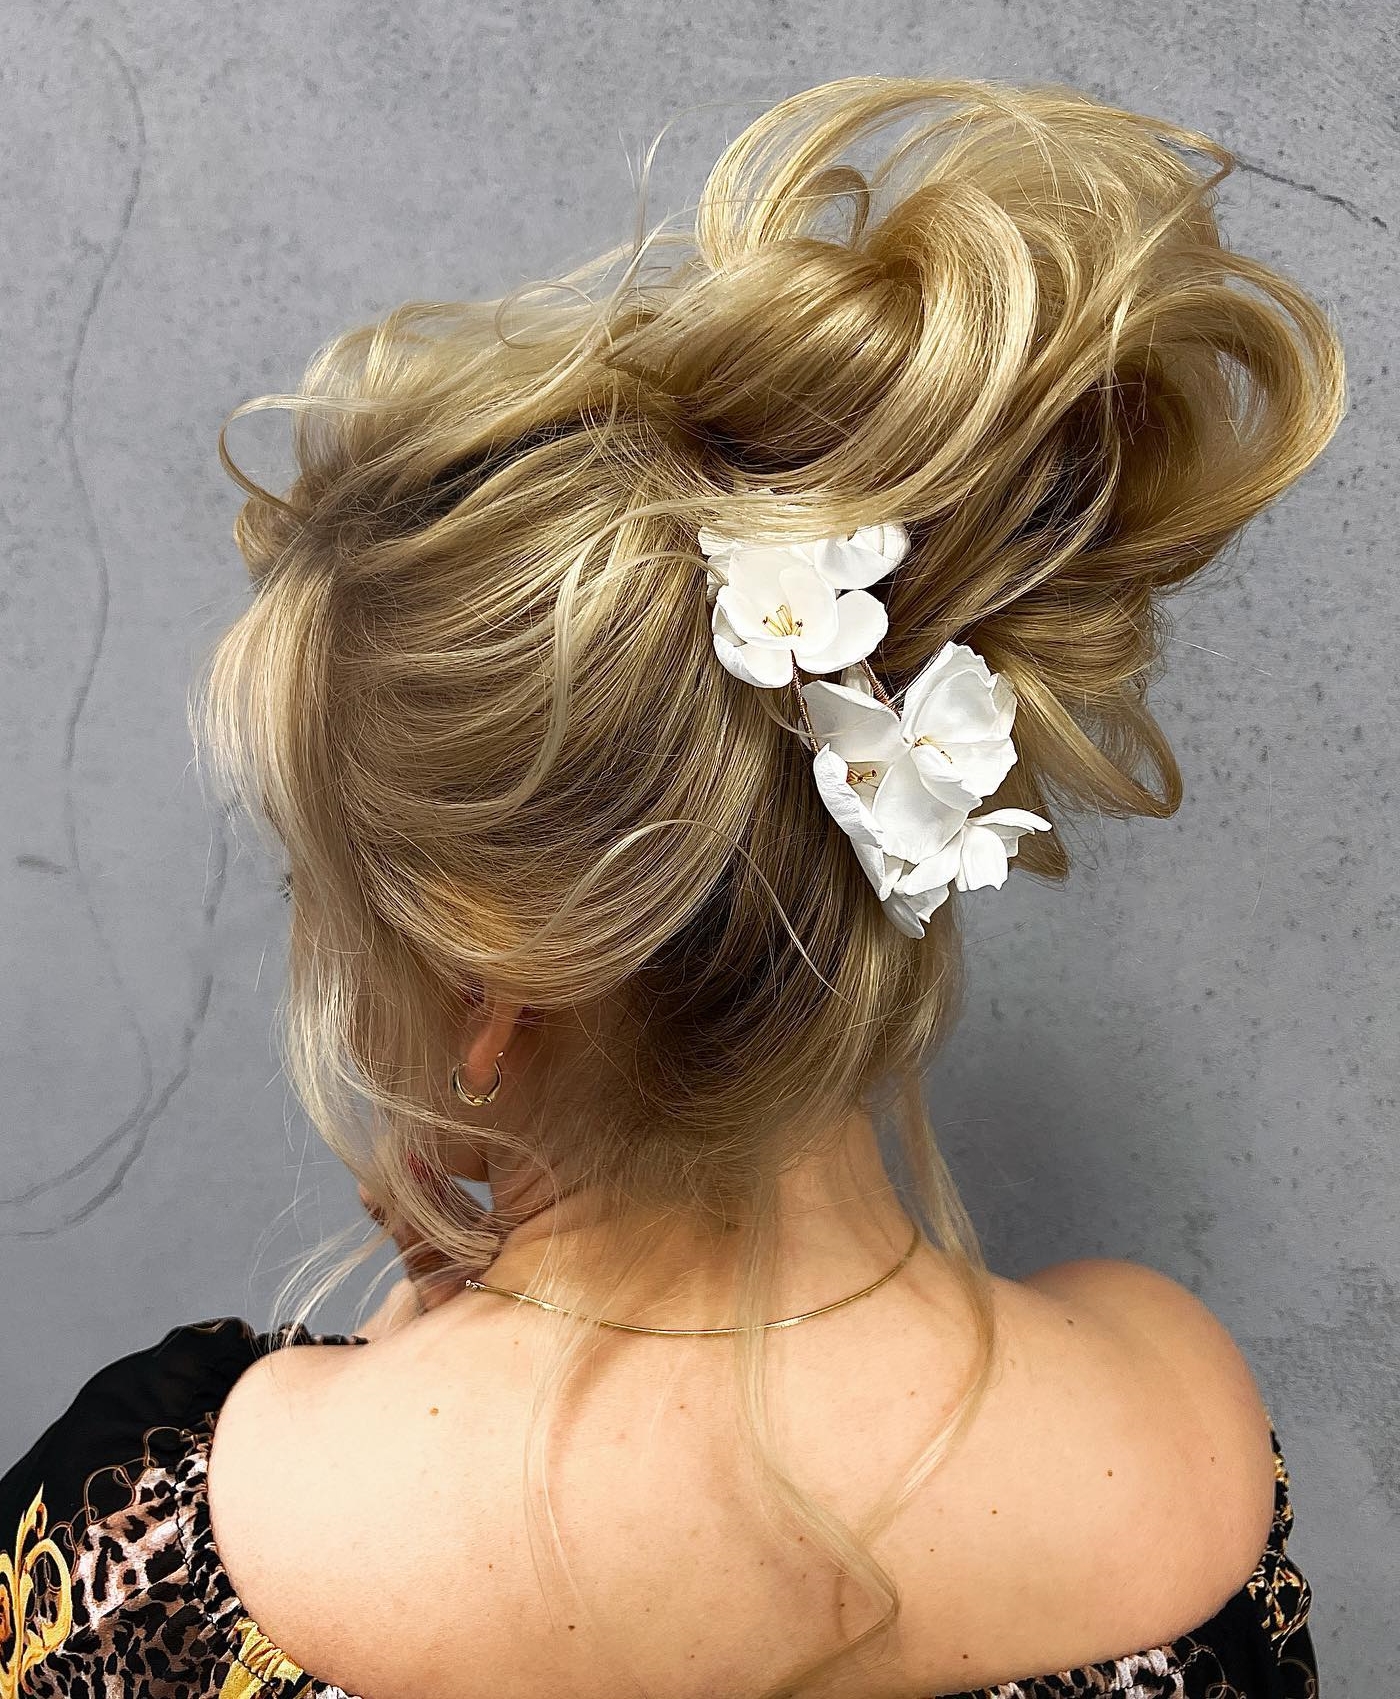 Blonde Wedding Updo Hairstyle with Floral Decor